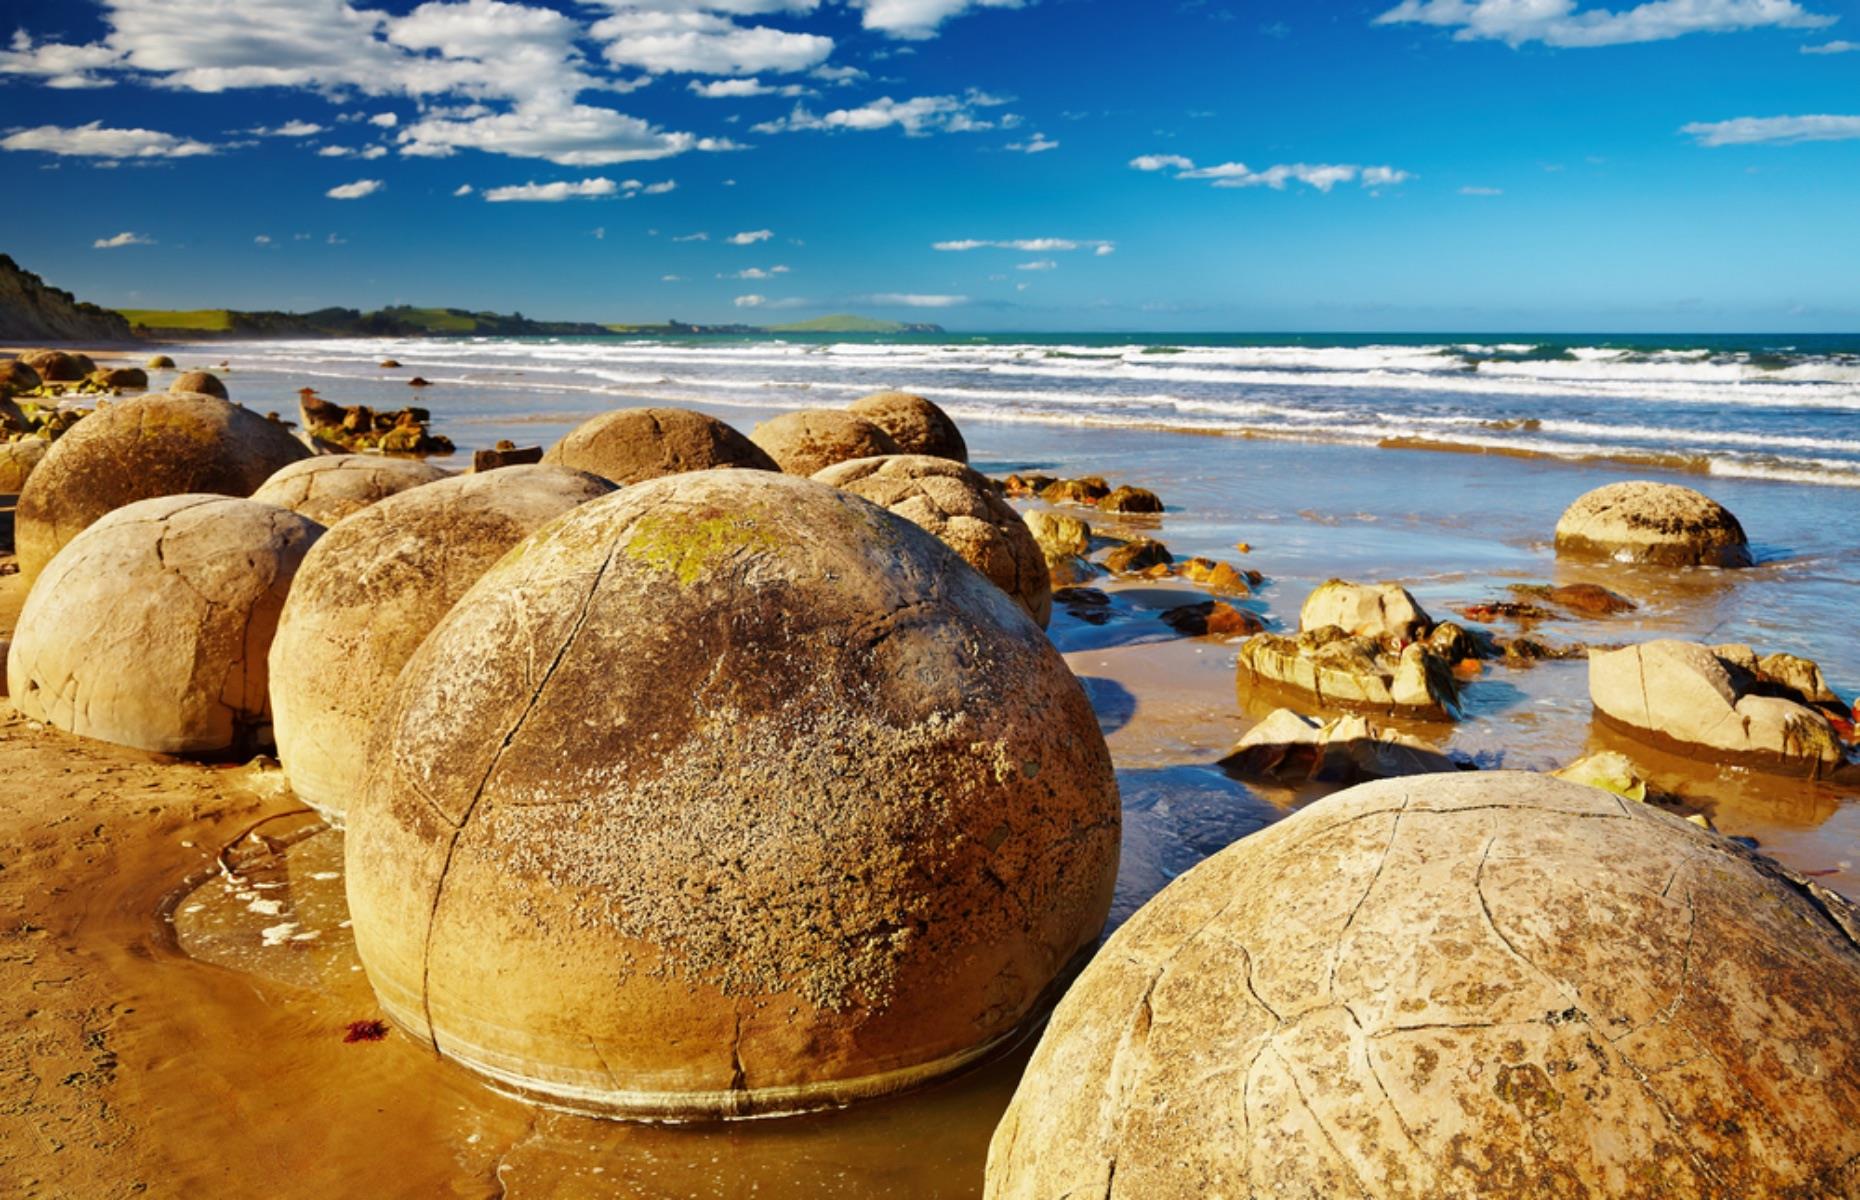 <p>These huge, bulbous anomalies scattering the sand of Koekohe Beach, between the towns of Moeraki and Hampden, add a different dimension to South Island’s scenic North Otago coast. Appearing like giant cannonballs up to 6.5 feet high, the geologic wonders look as though they were carved by human hands, but in fact they are made of calcified rock concreted together 65 million years ago and slowly released from the soft seabed by coastal erosion. Similar Koutu Boulders can be found around Hokianga Harbour on North Island.</p>